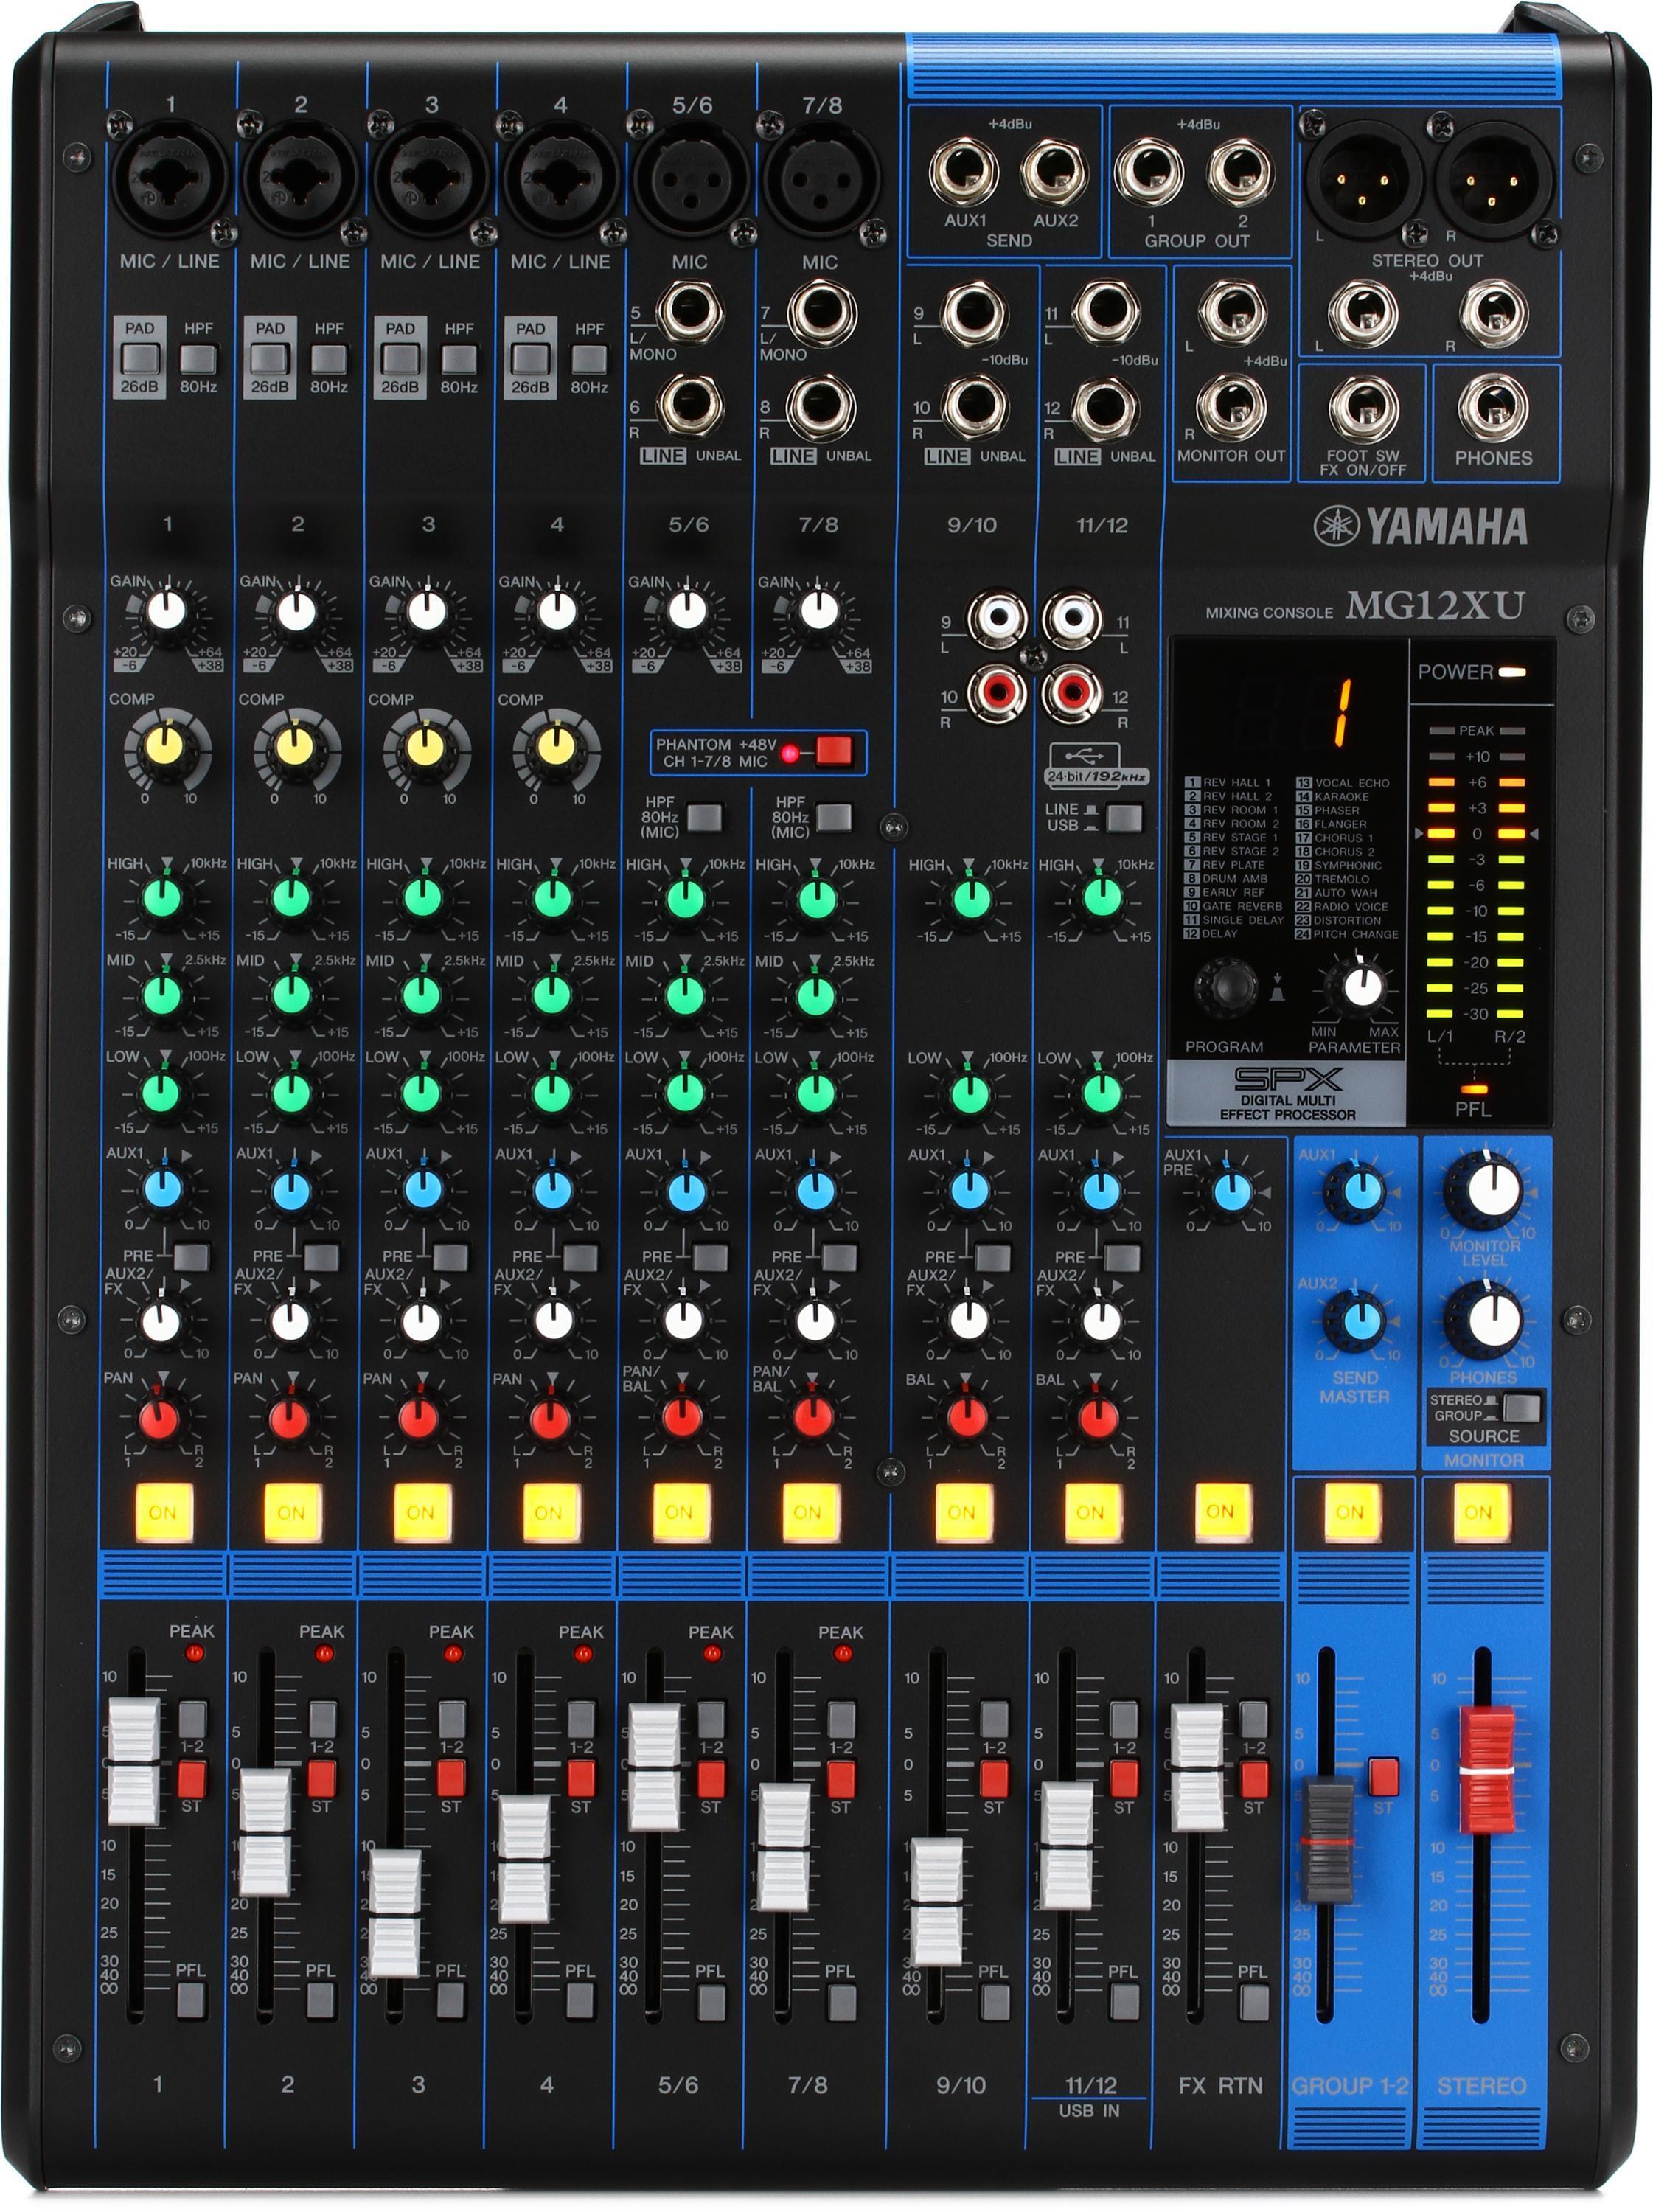 Bundled Item: Yamaha MG12XU 12-channel Mixer with USB and Effects